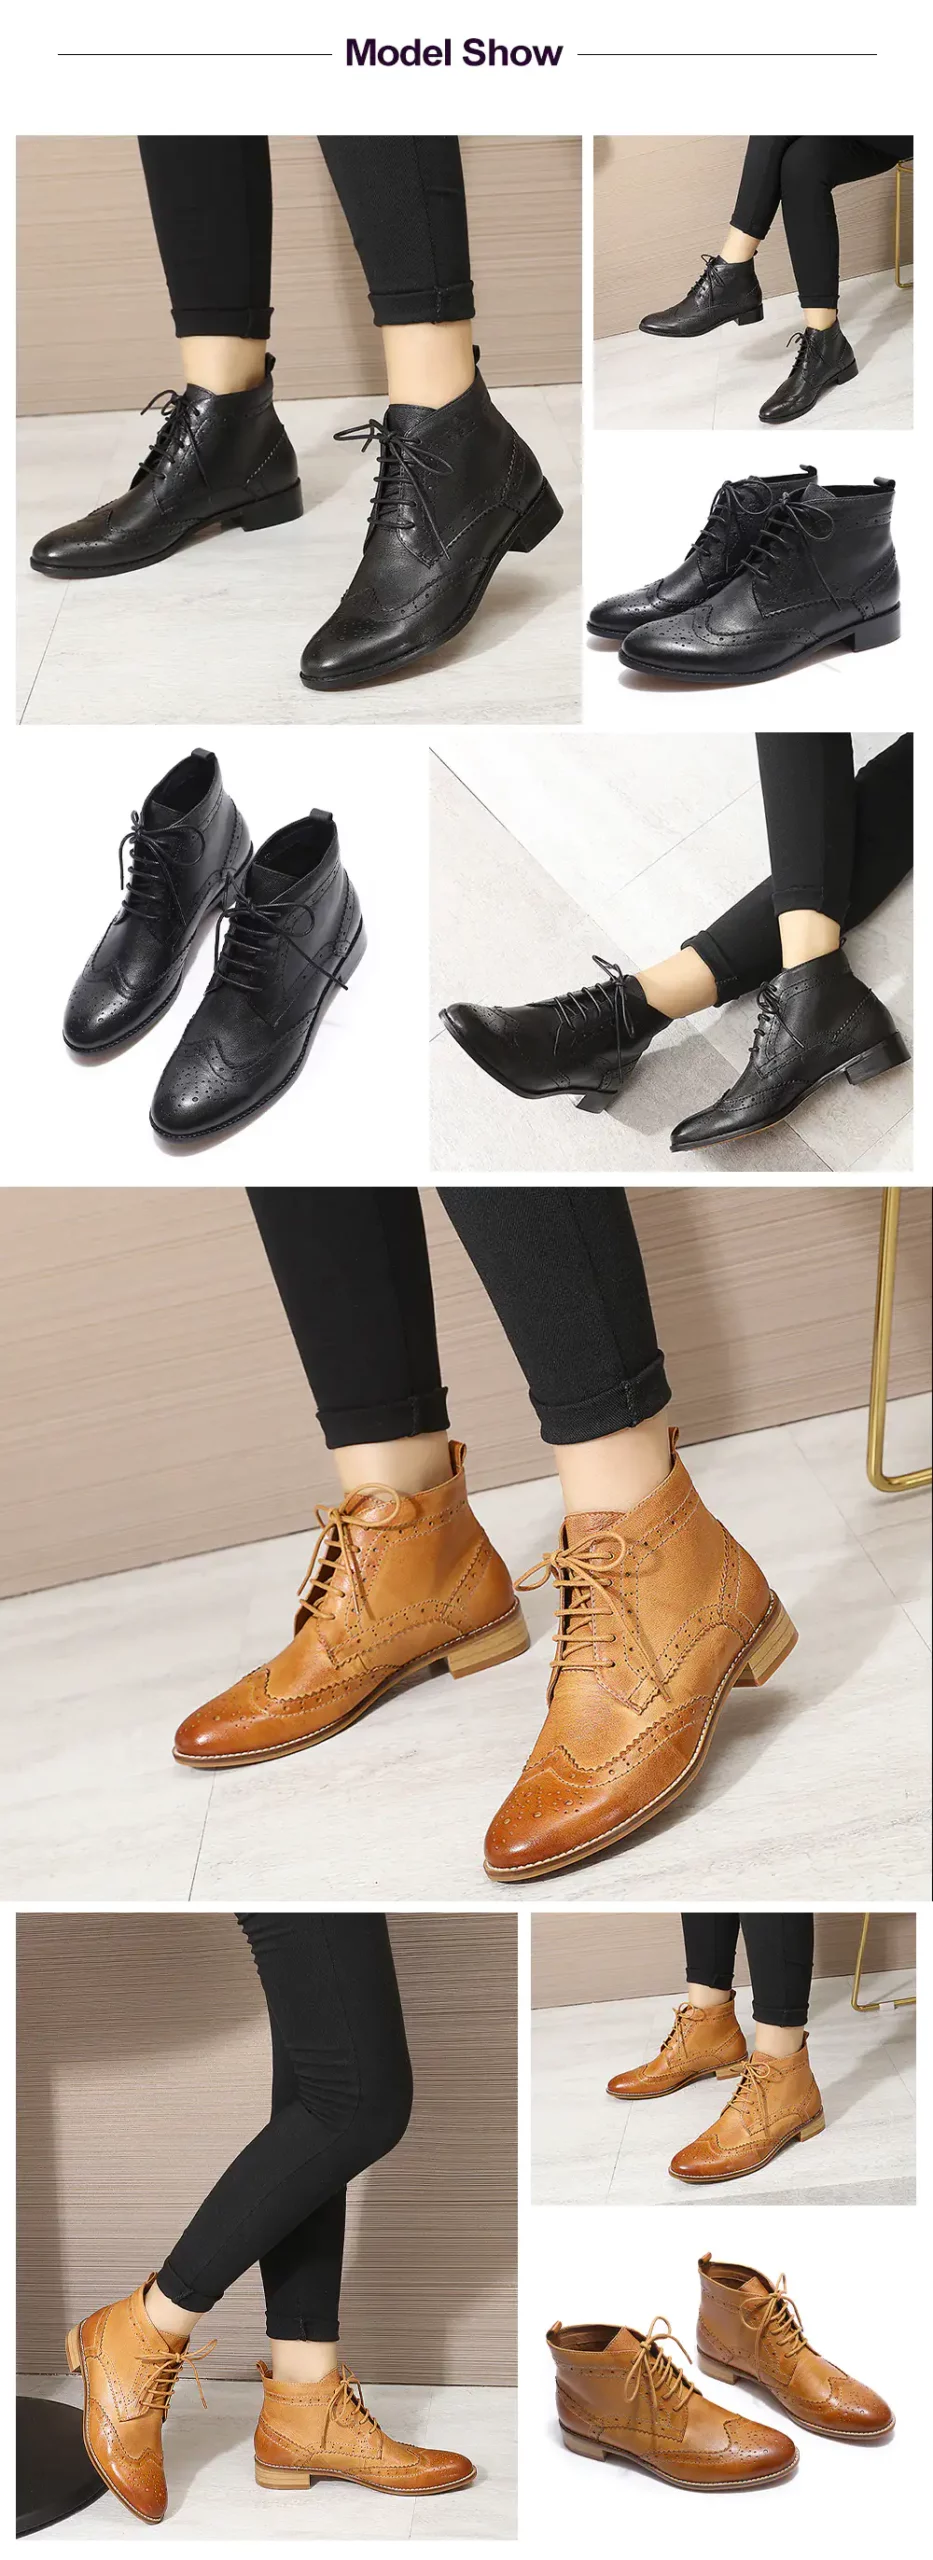 Mona flying Woman Genuine Leather Wingtips Boots Ankle Heels Fashion Lace up Booties with Low Heel For women Ladies 068-65